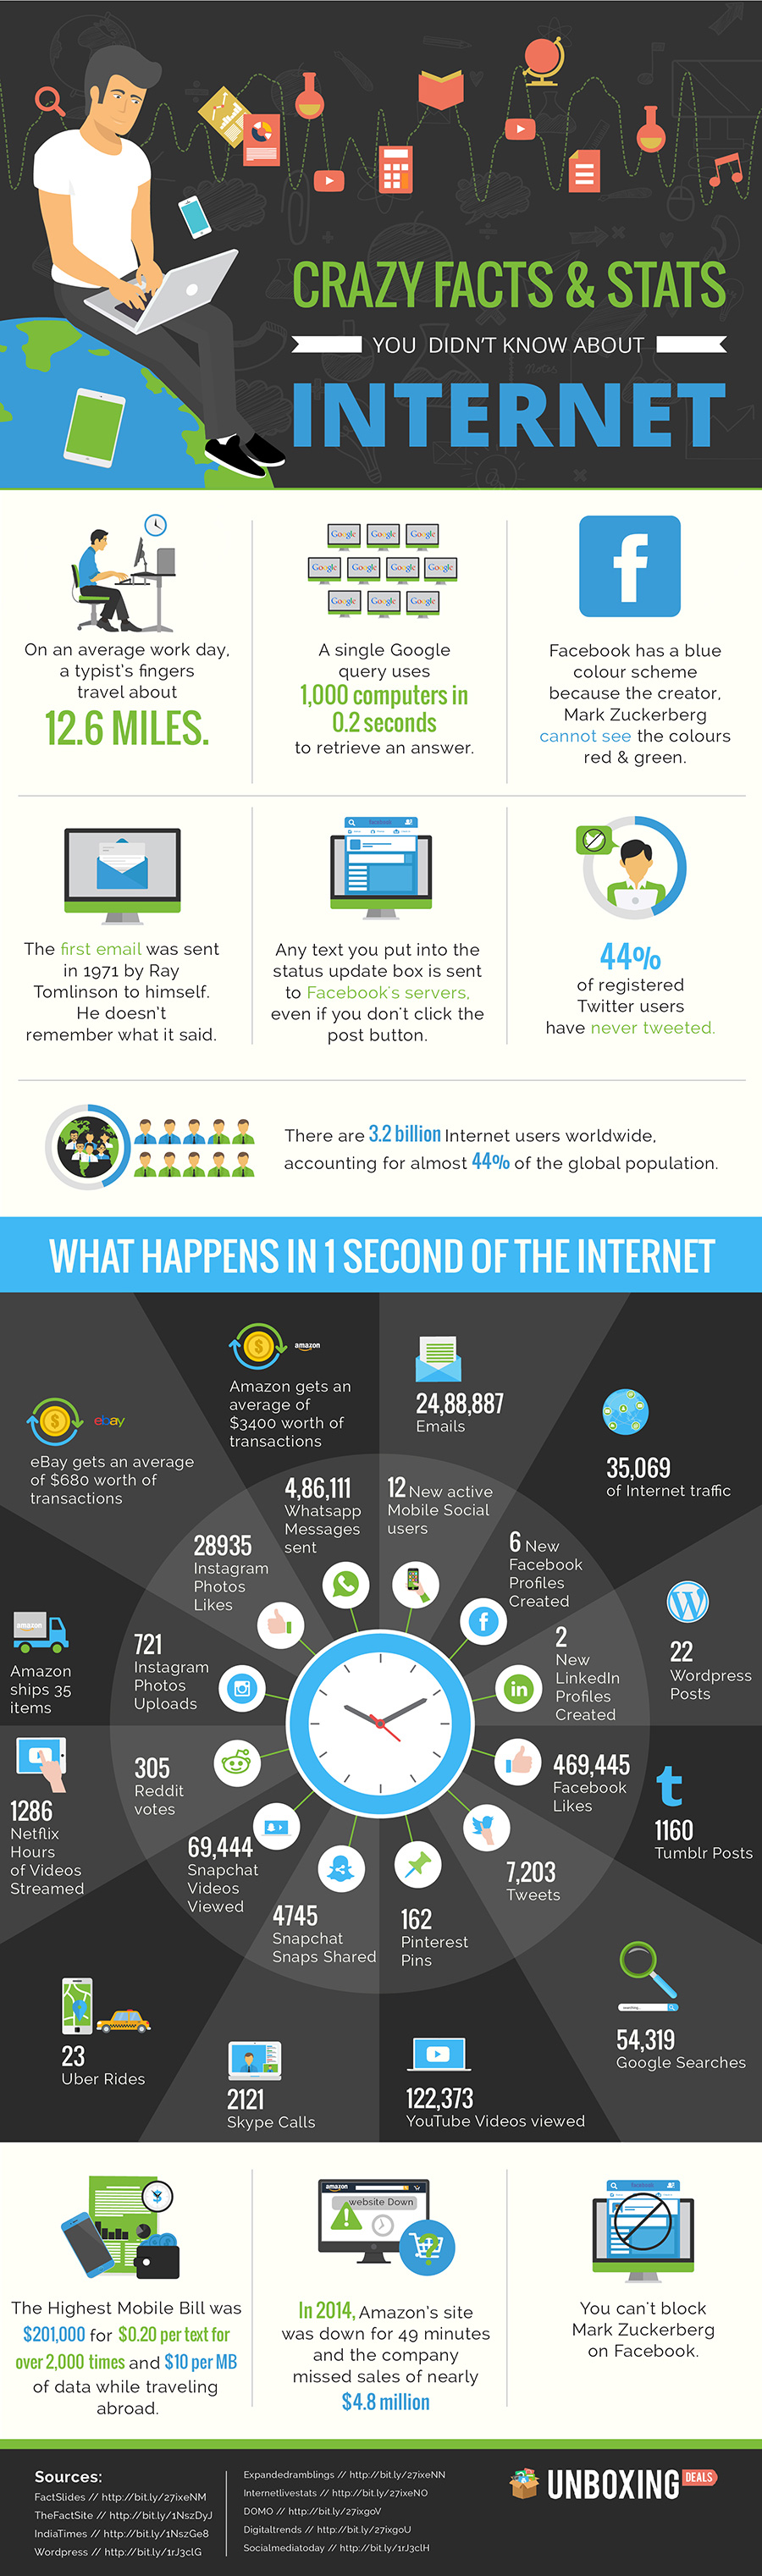 Crazy Facts & Stats You Didn’t Know About the Internet